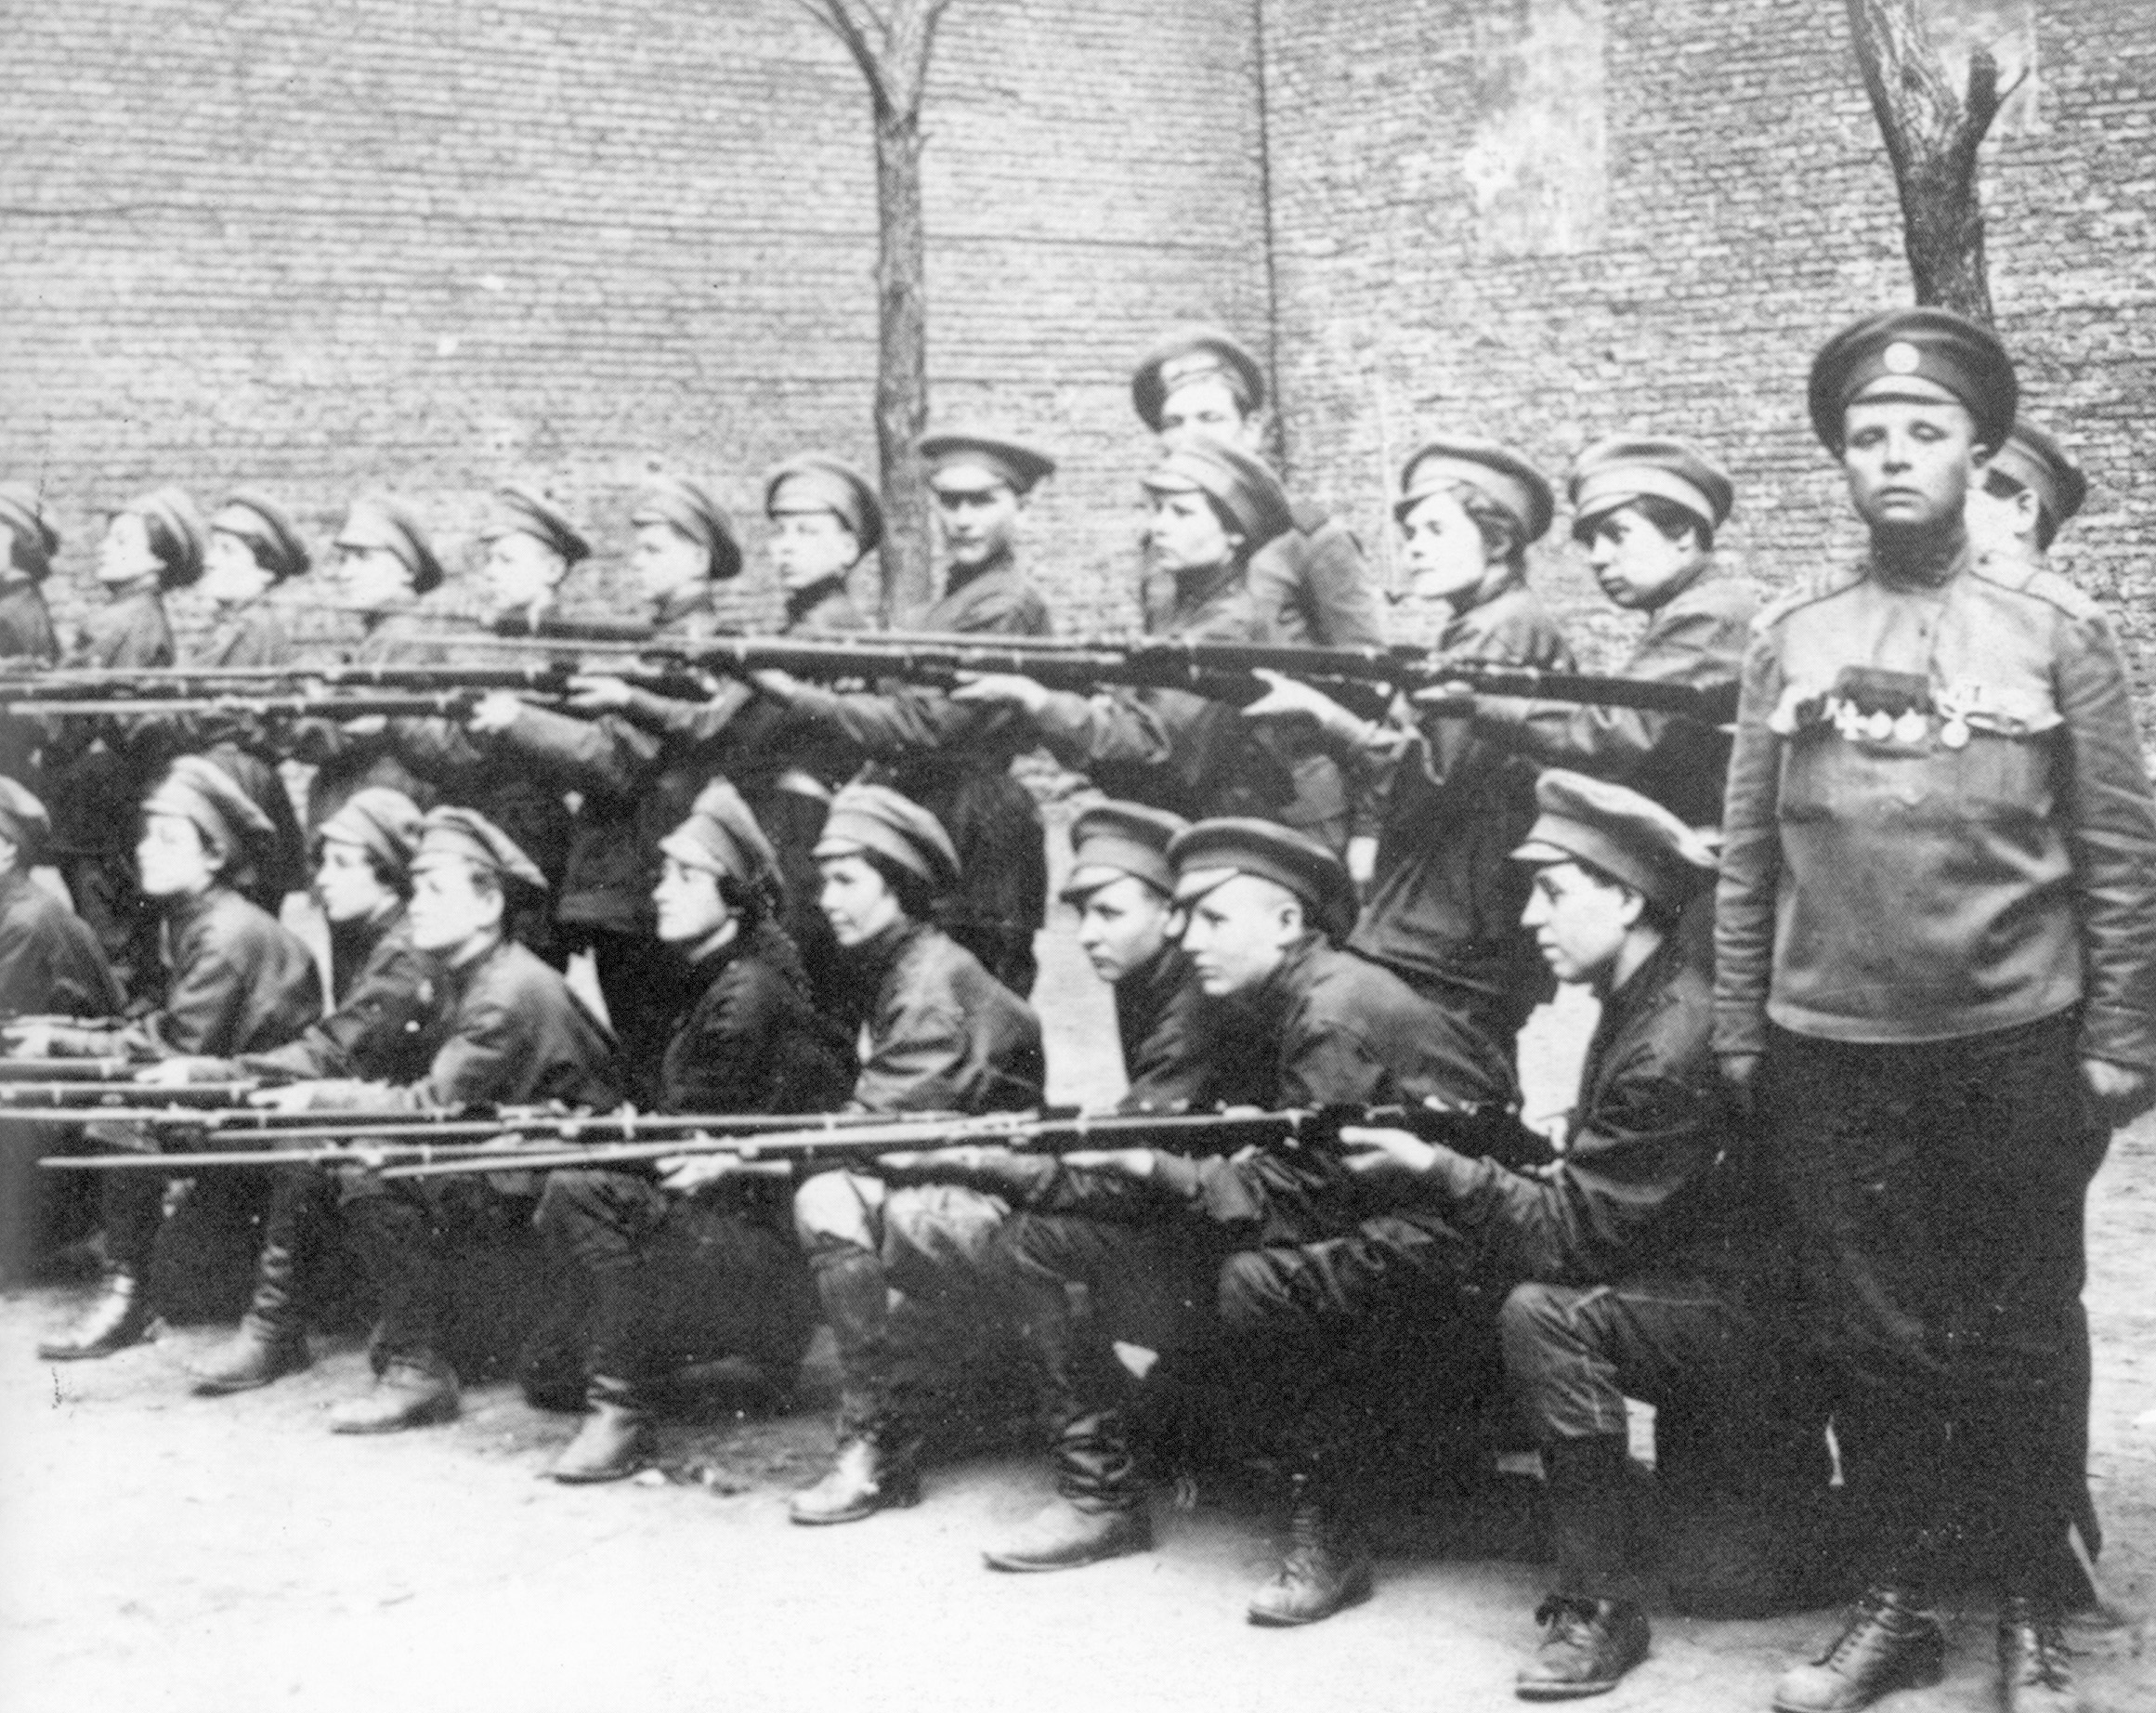 Botchkareva at right poses with a few of her female soldiers of the Battalion of Death. They threw themselves at the Germans in the 1917 summer offensive.